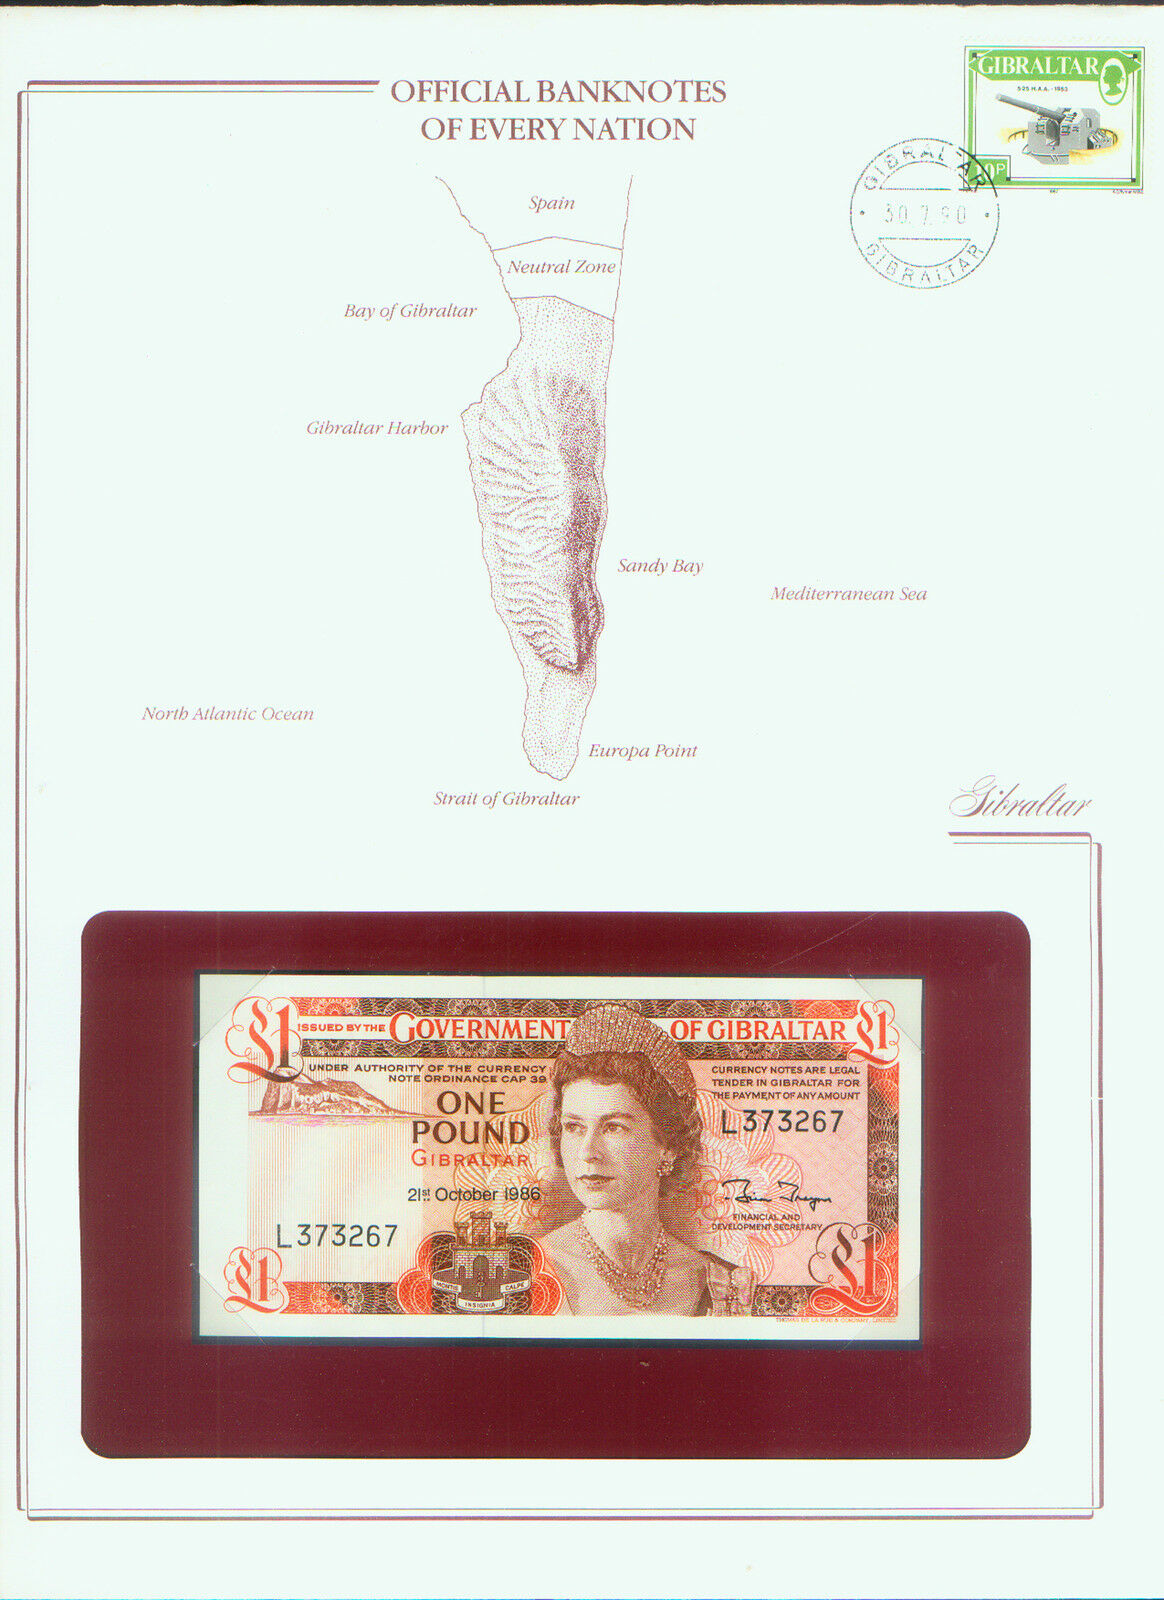 GIBRALTAR 1986 PICK# 20d BANK NOTE £1 STAMPED WINDOWED ENVELOPE with MAP & INFO